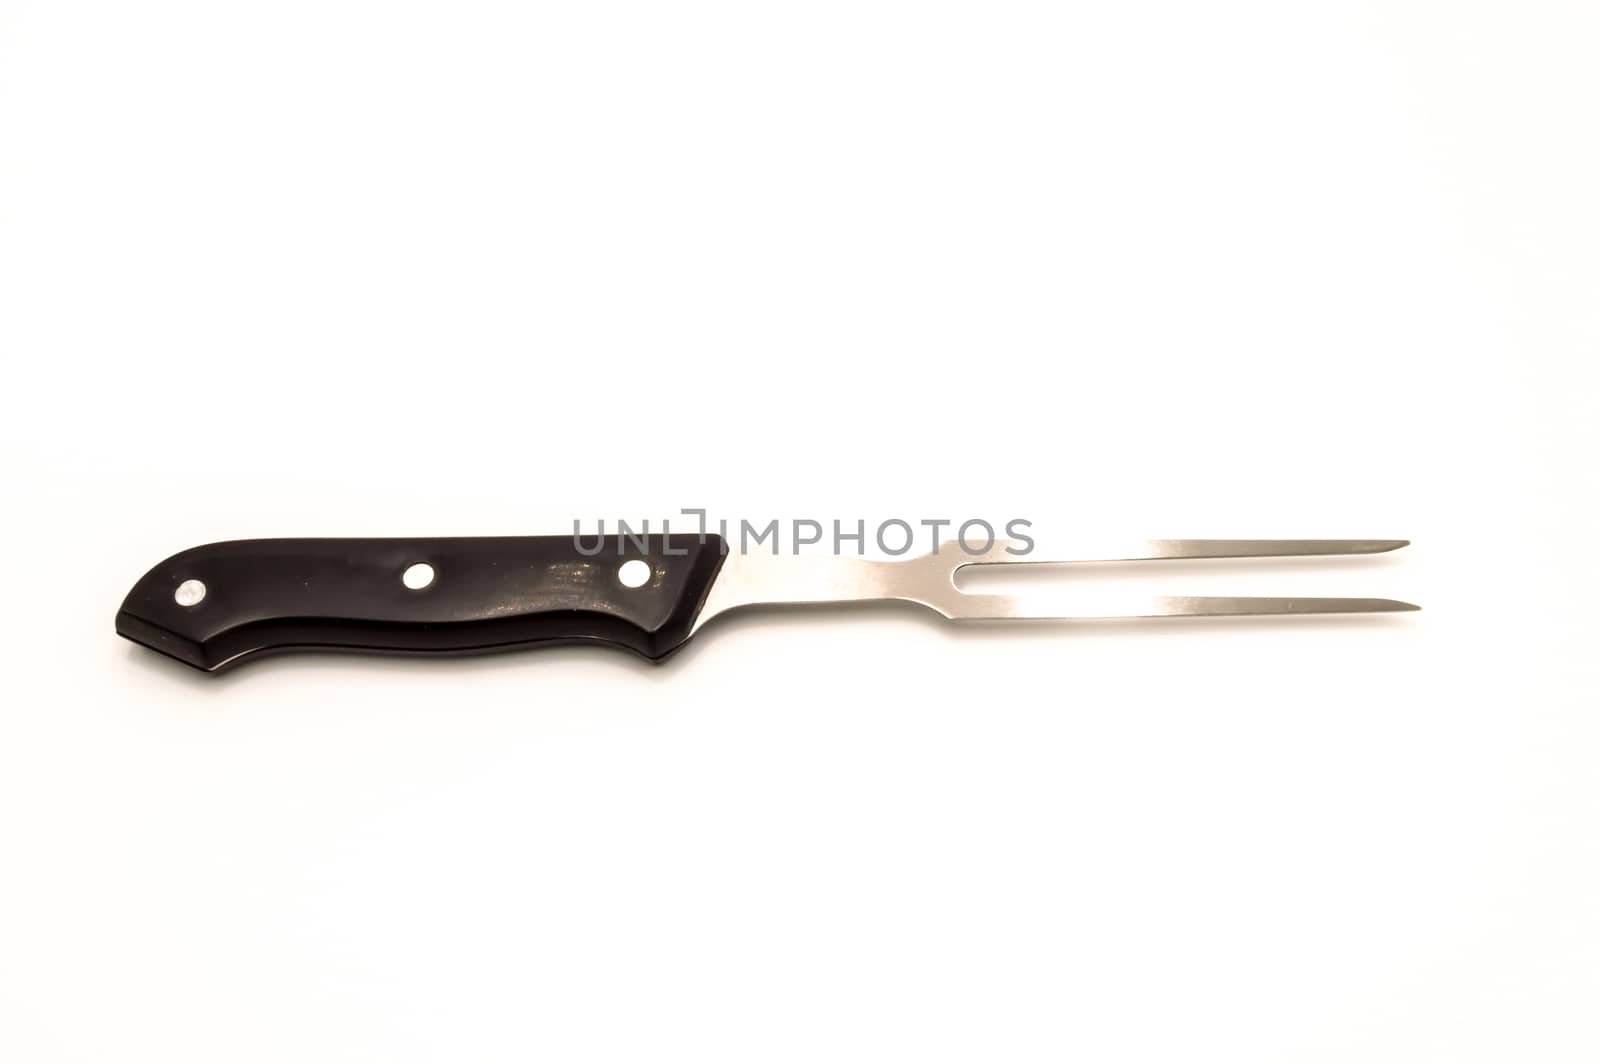 Meat fork with a black wooden handle, isolated on a white background